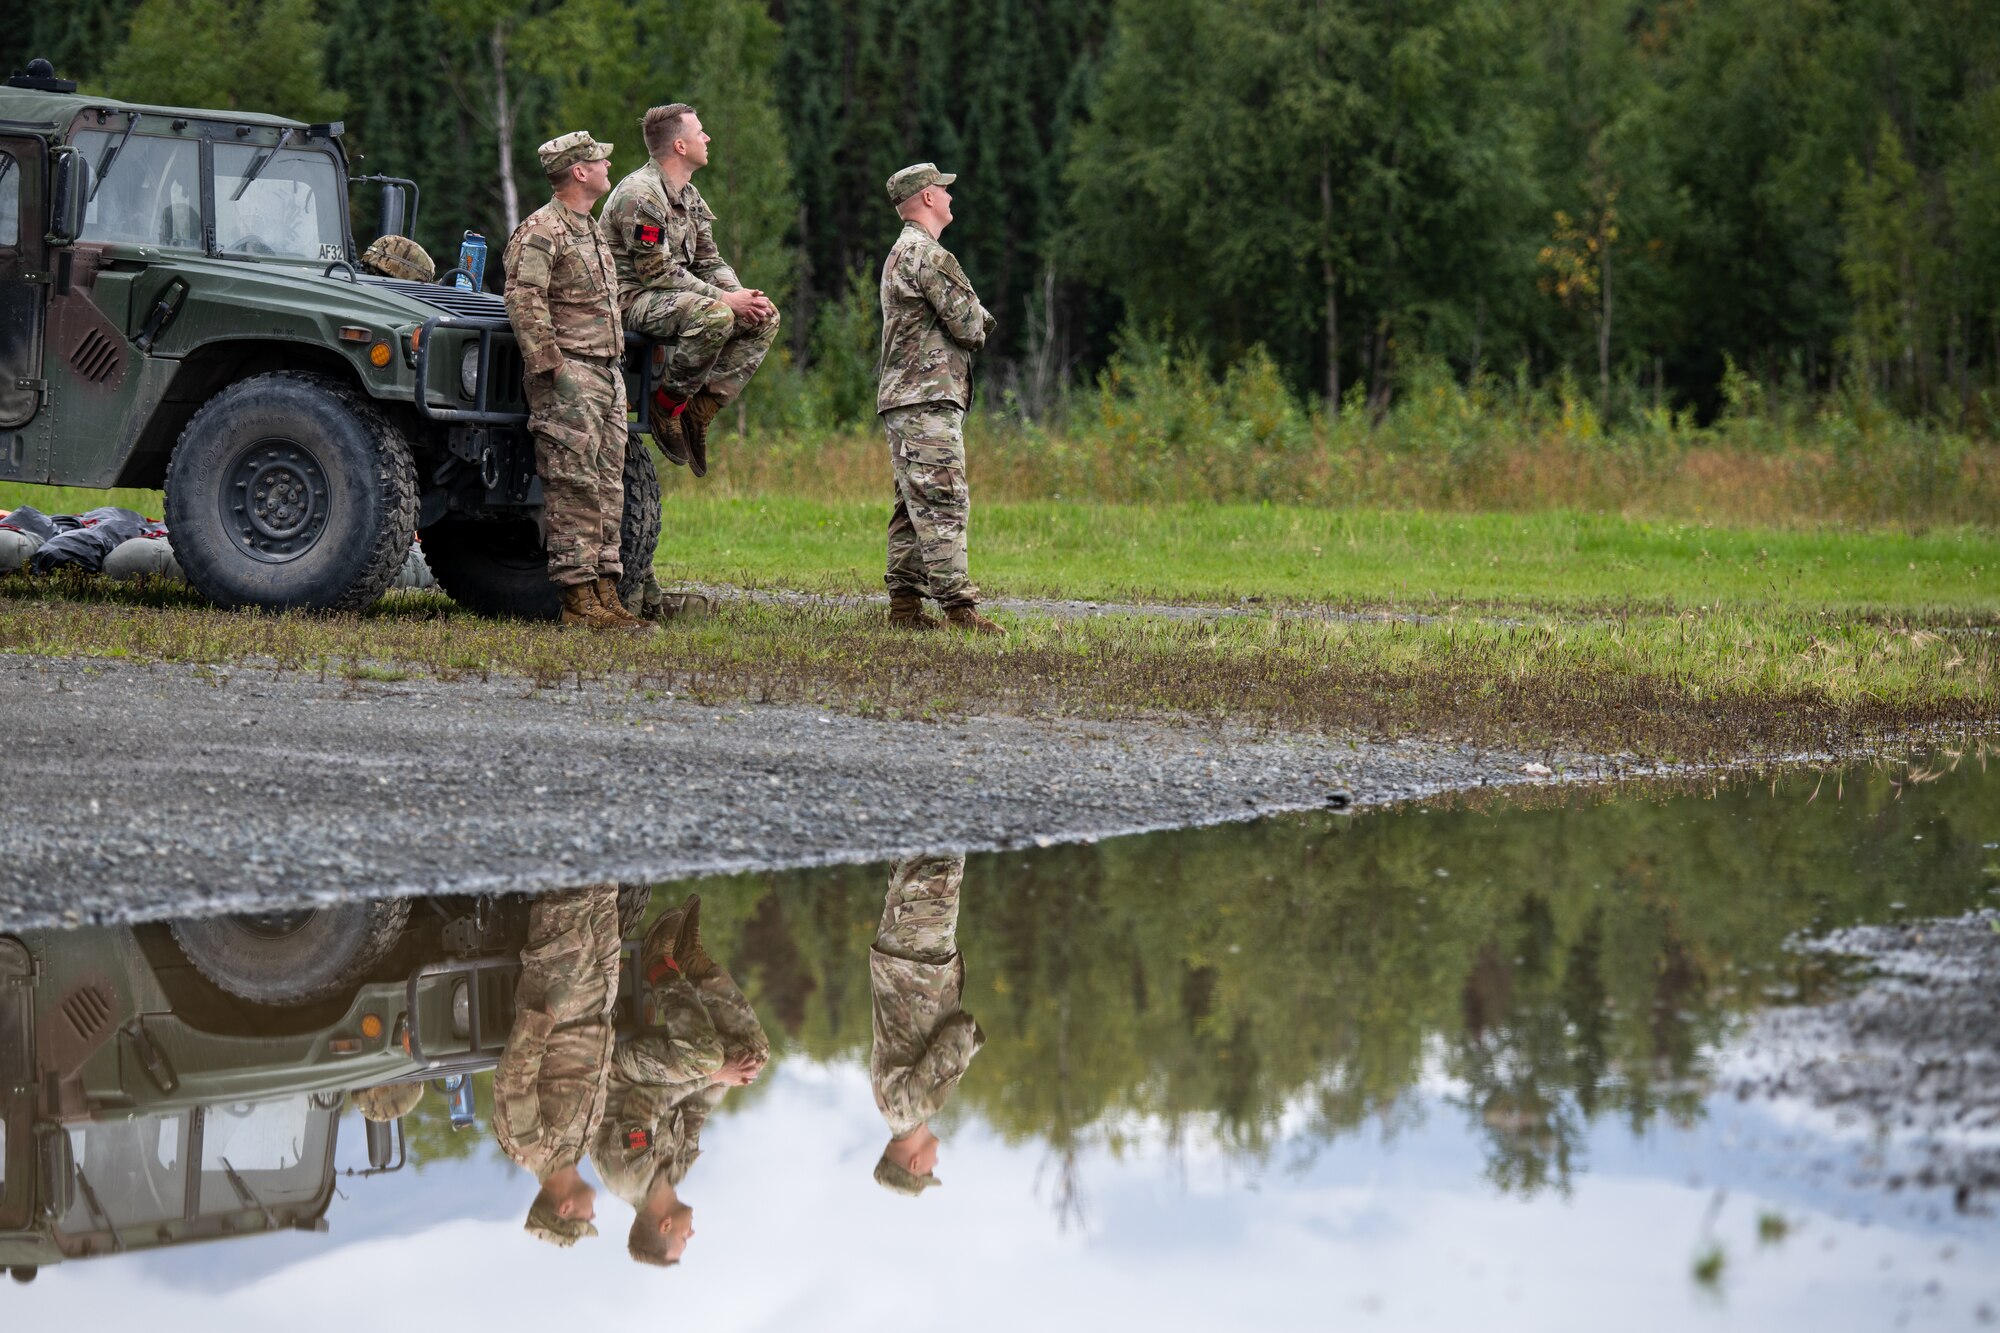 Soldiers observe airborne operations.